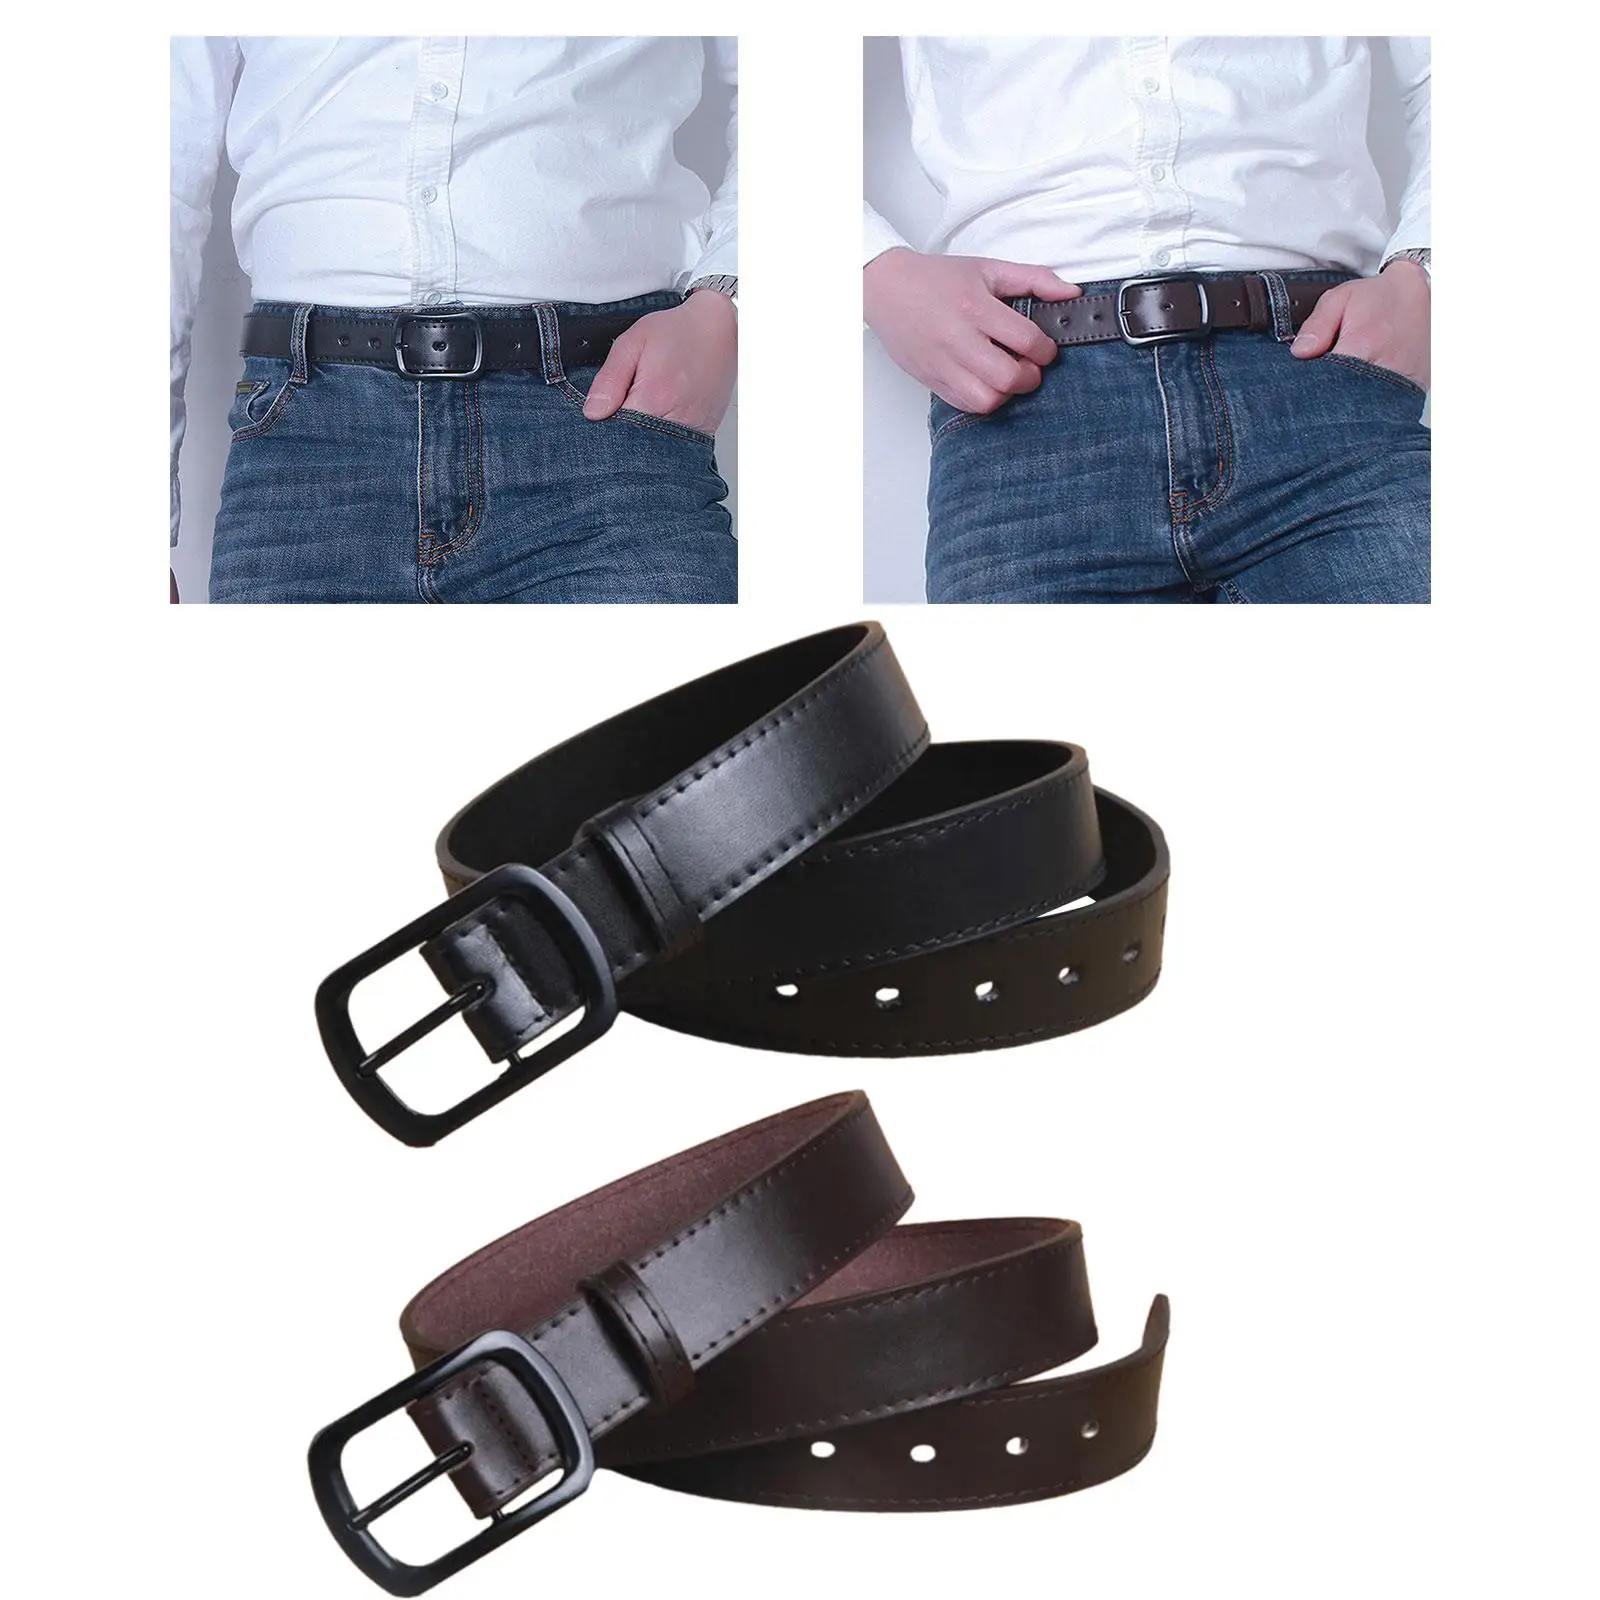 Men Dress Belt 120cm Long Classic Pin Buckle Decorative Adjustable Waistband for suits Party Work Jeans Accessories Business